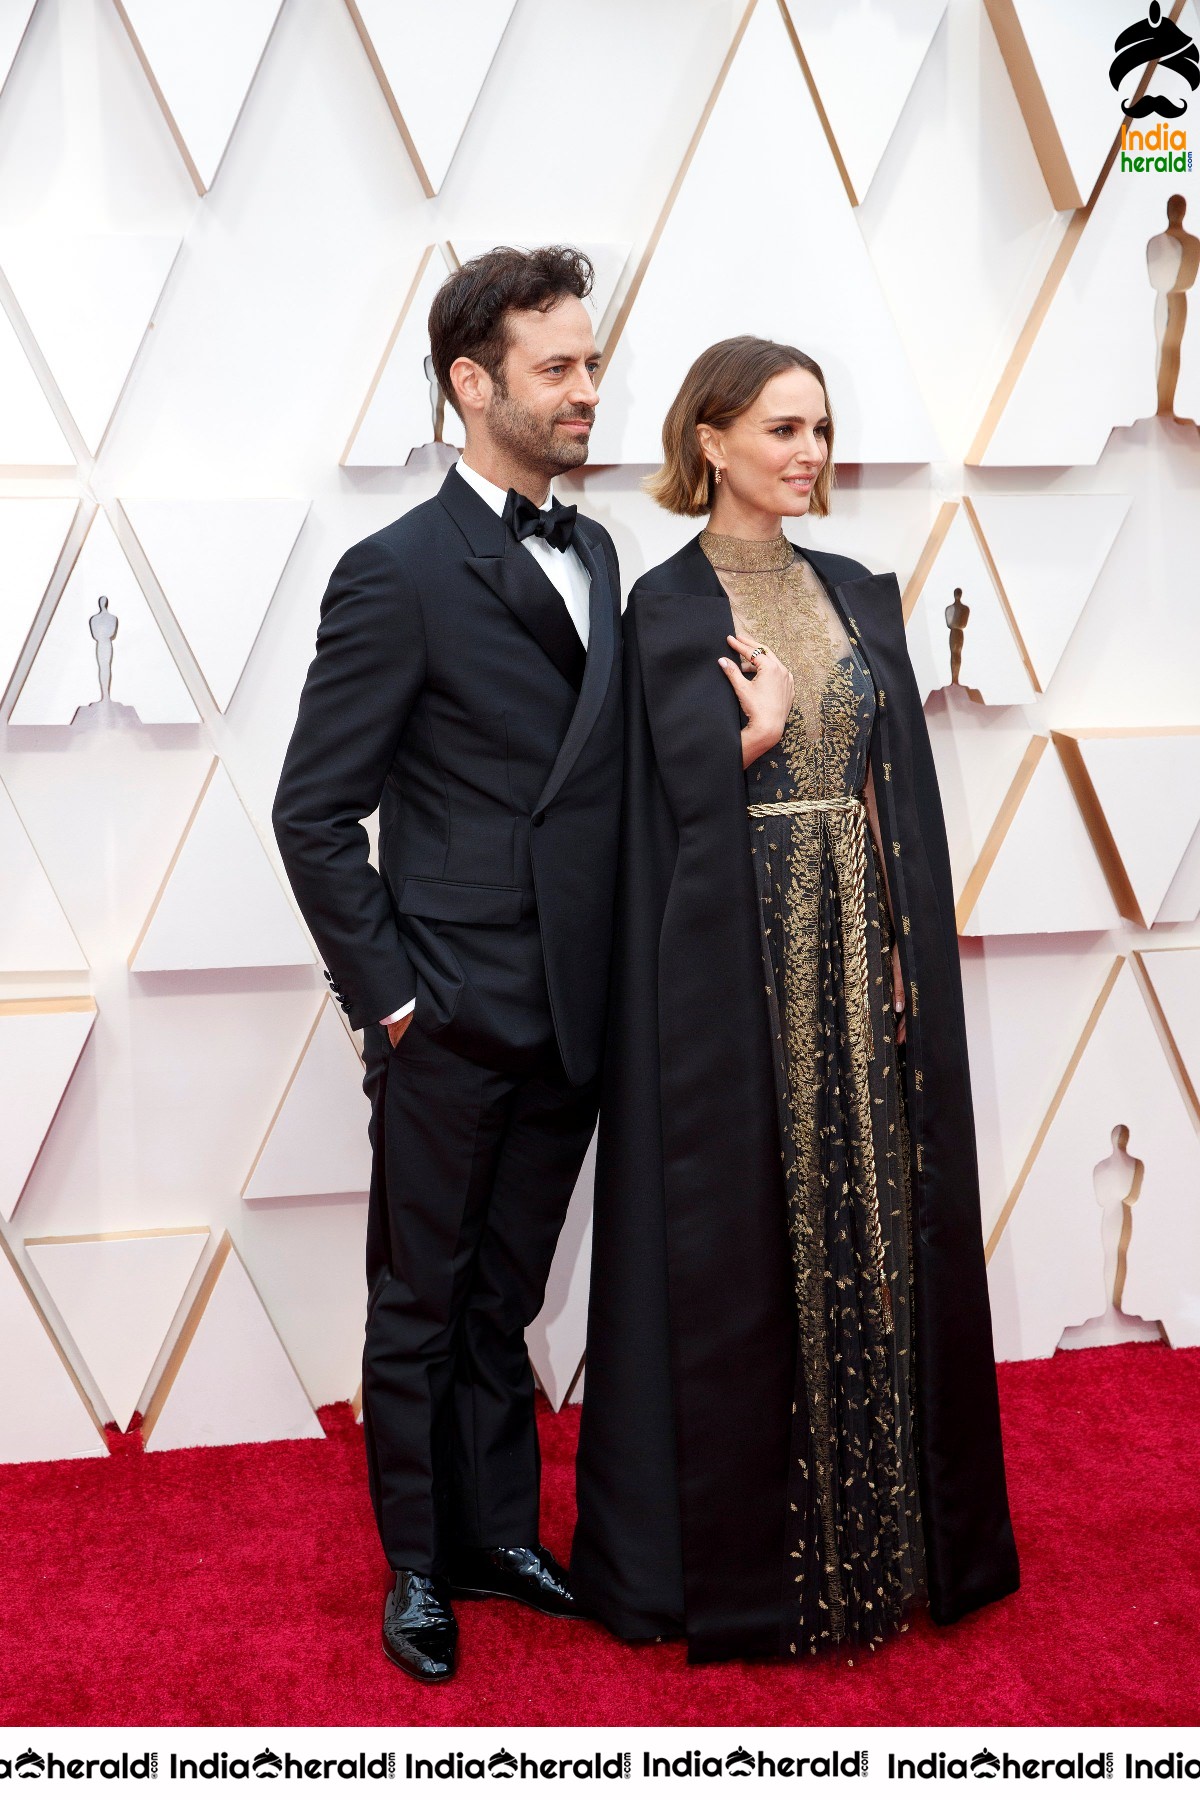 Natalie Portman at 92nd Annual Academy Awards in Los Angeles